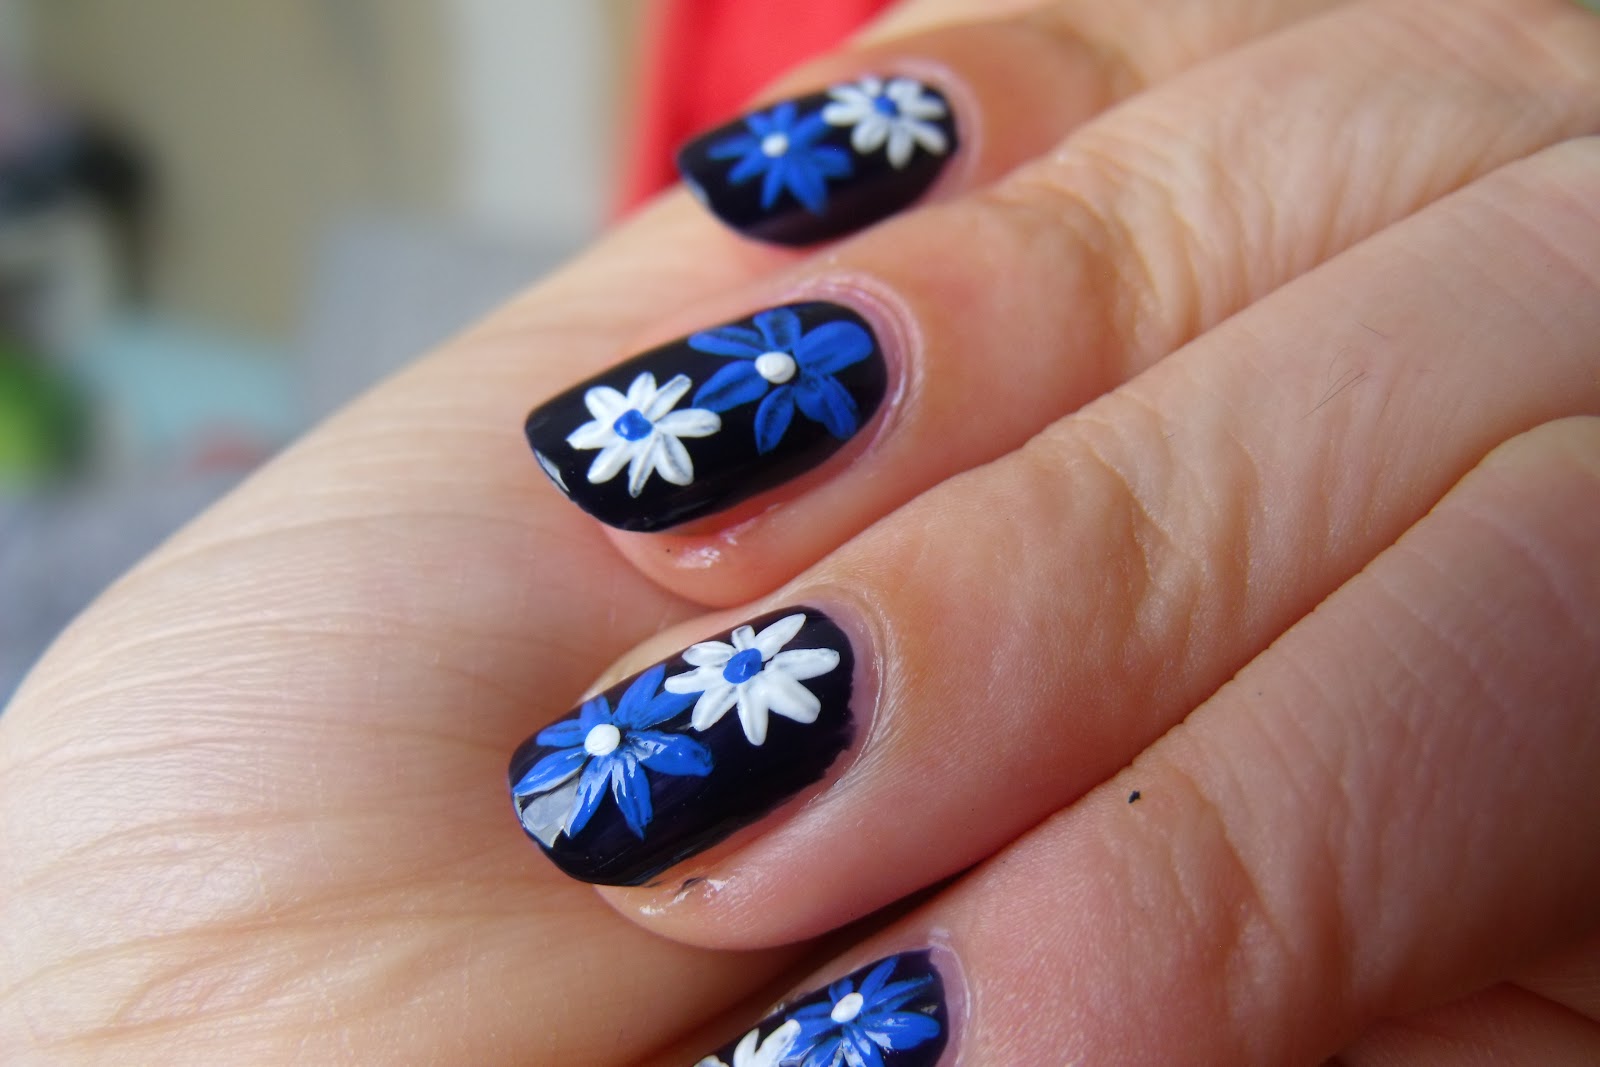 9. Floral Nail Art Designs for a Touch of Spring - wide 5